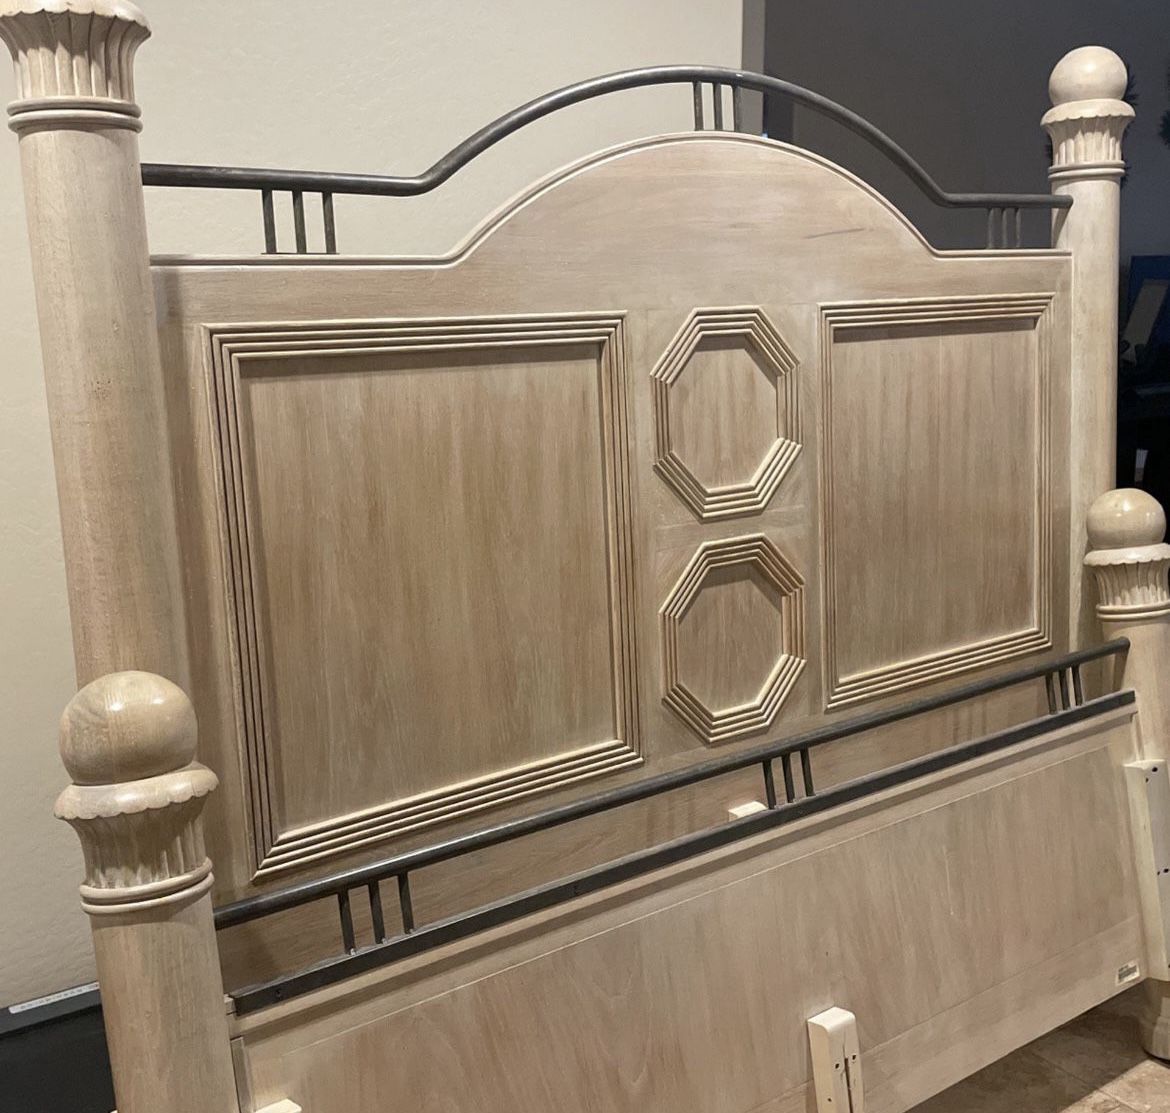 King Bed, Dresser, and Buffet